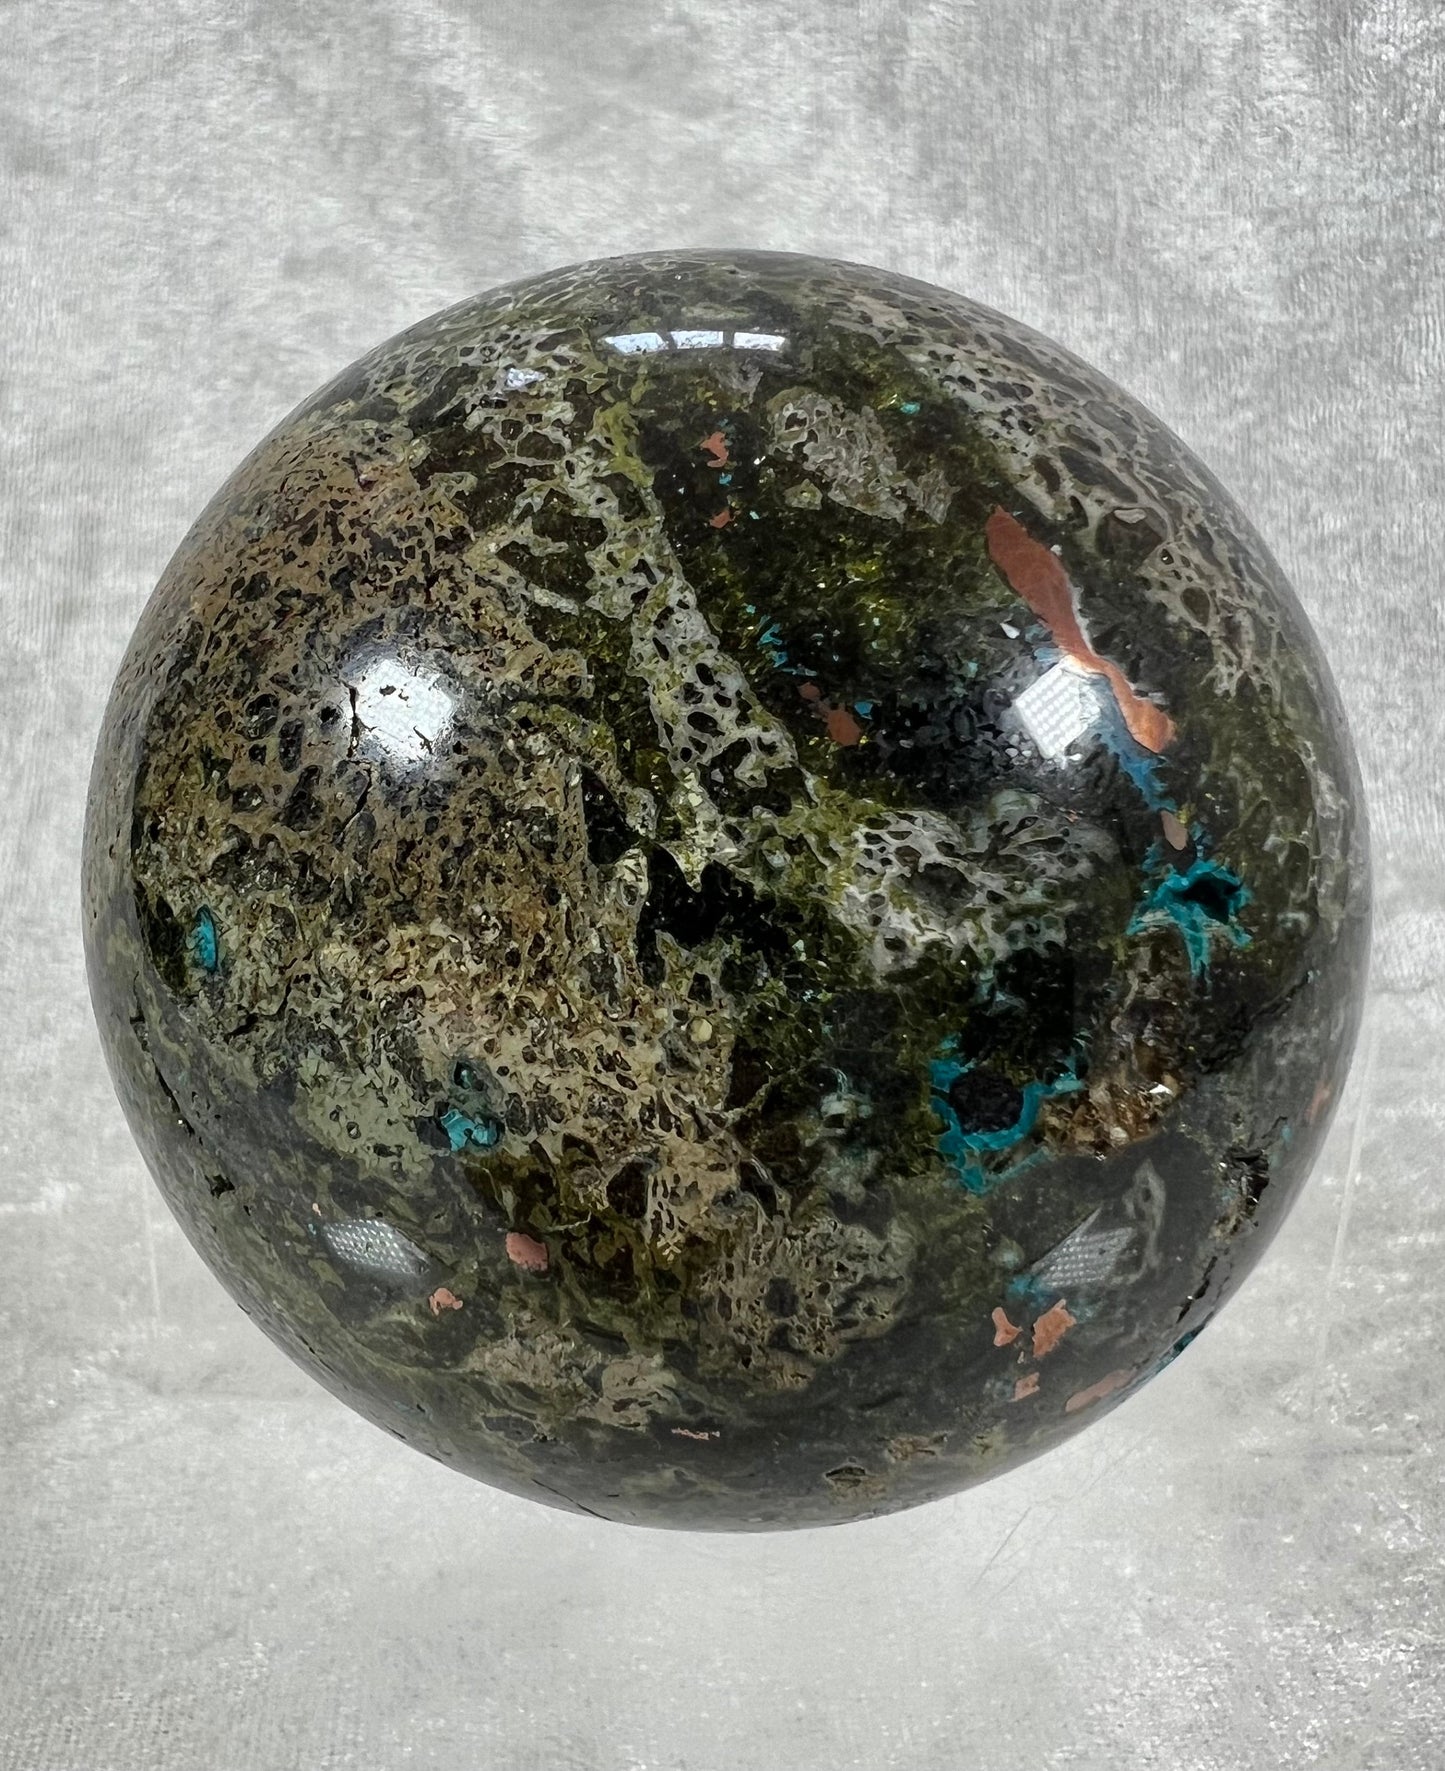 Stunning Large Epidote and Chrysocolla Sphere With Copper Inclusions. 80mm. Very Rare And High Quality. Awesome Collectors Piece!